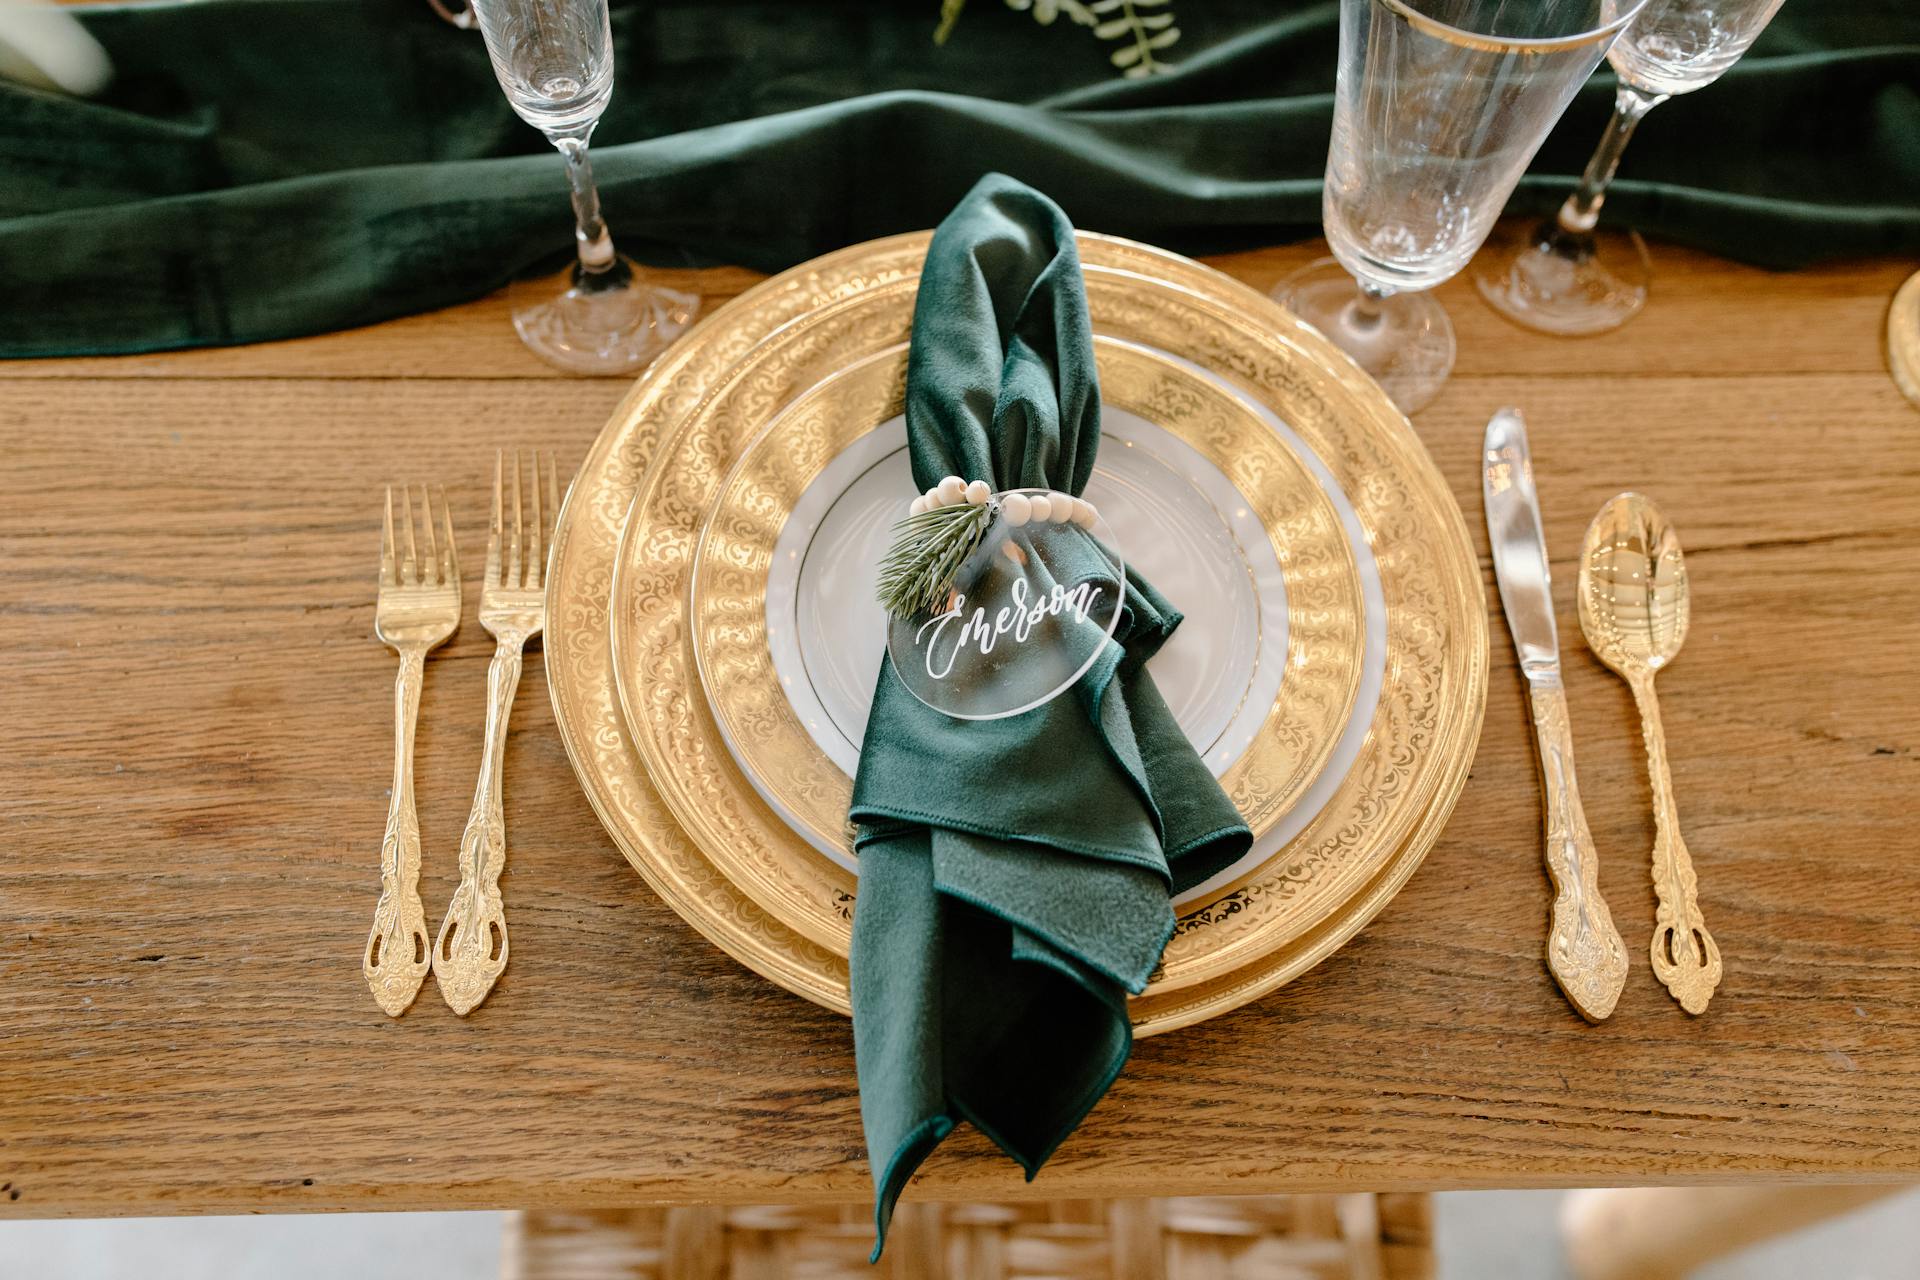 Table setting with elegant tableware and personalized napkin ring